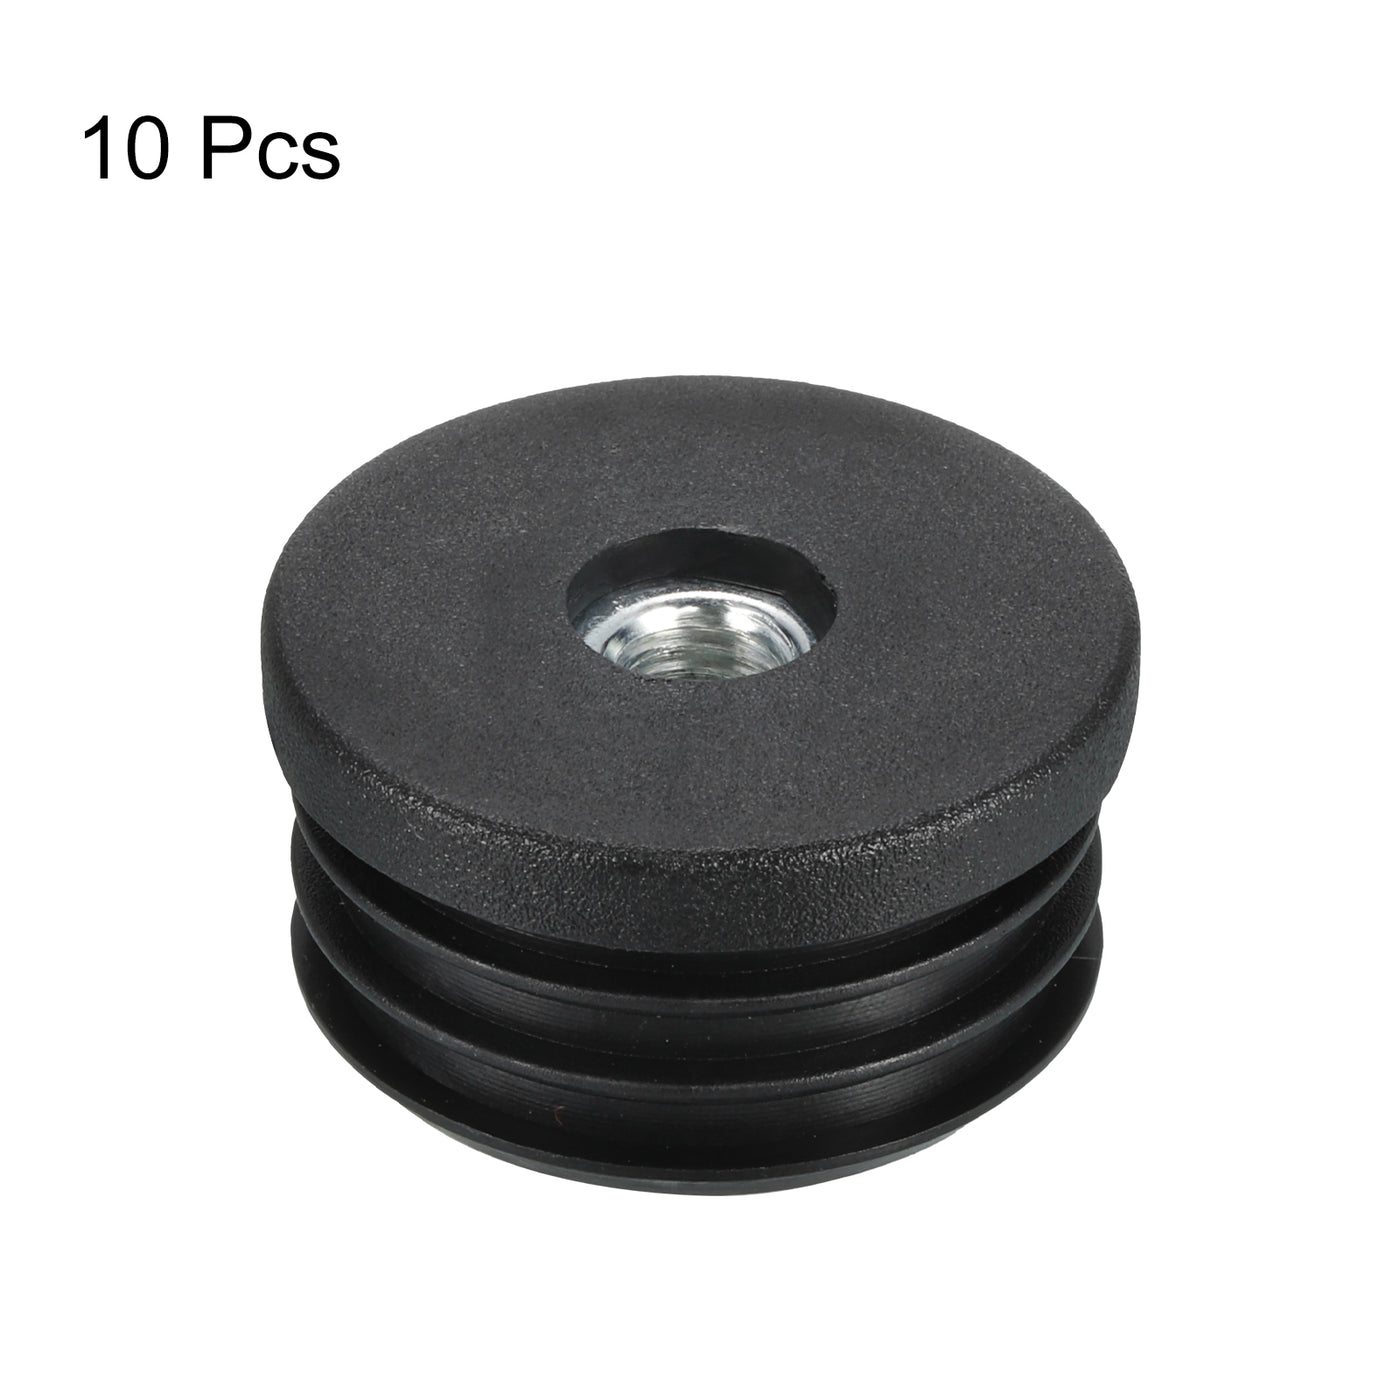 uxcell Uxcell 10Pcs Caster Insert with Thread, 38mm/1.5" M8 Thread for Furniture